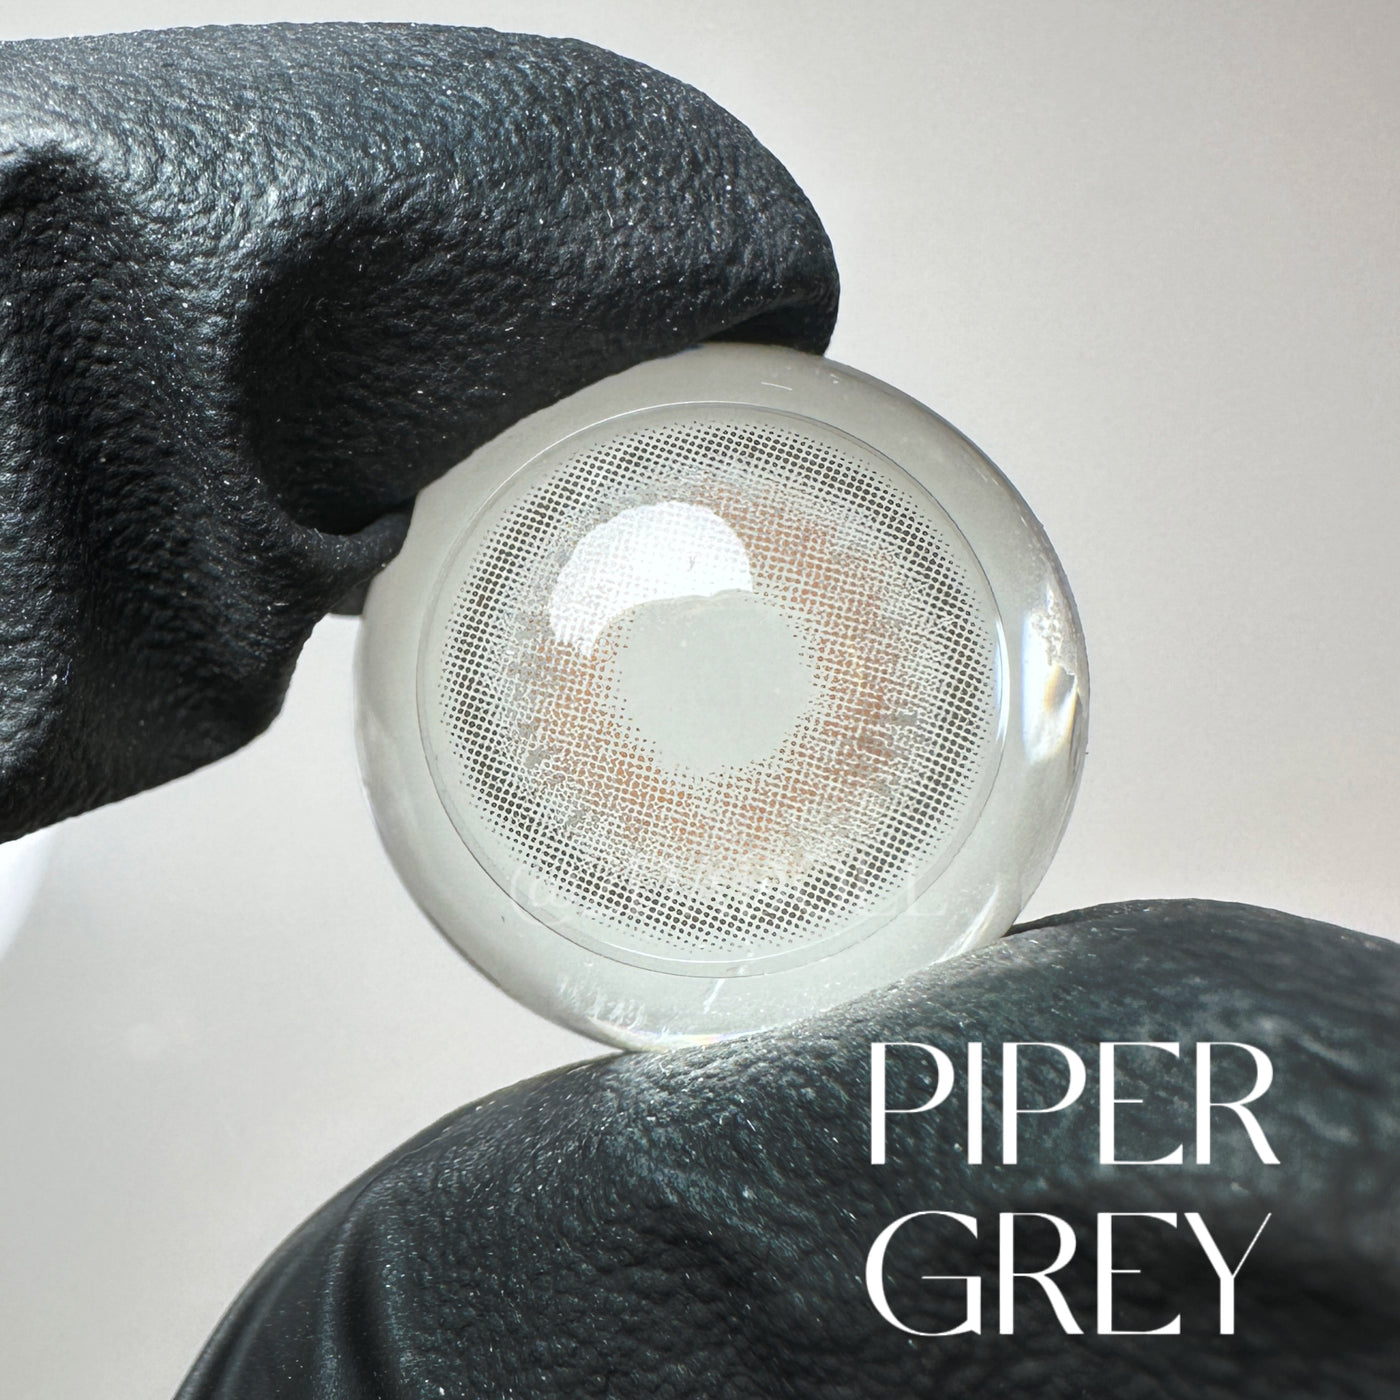 2Dadoll Piper grey Contact Lenses(1 pair/6 months)